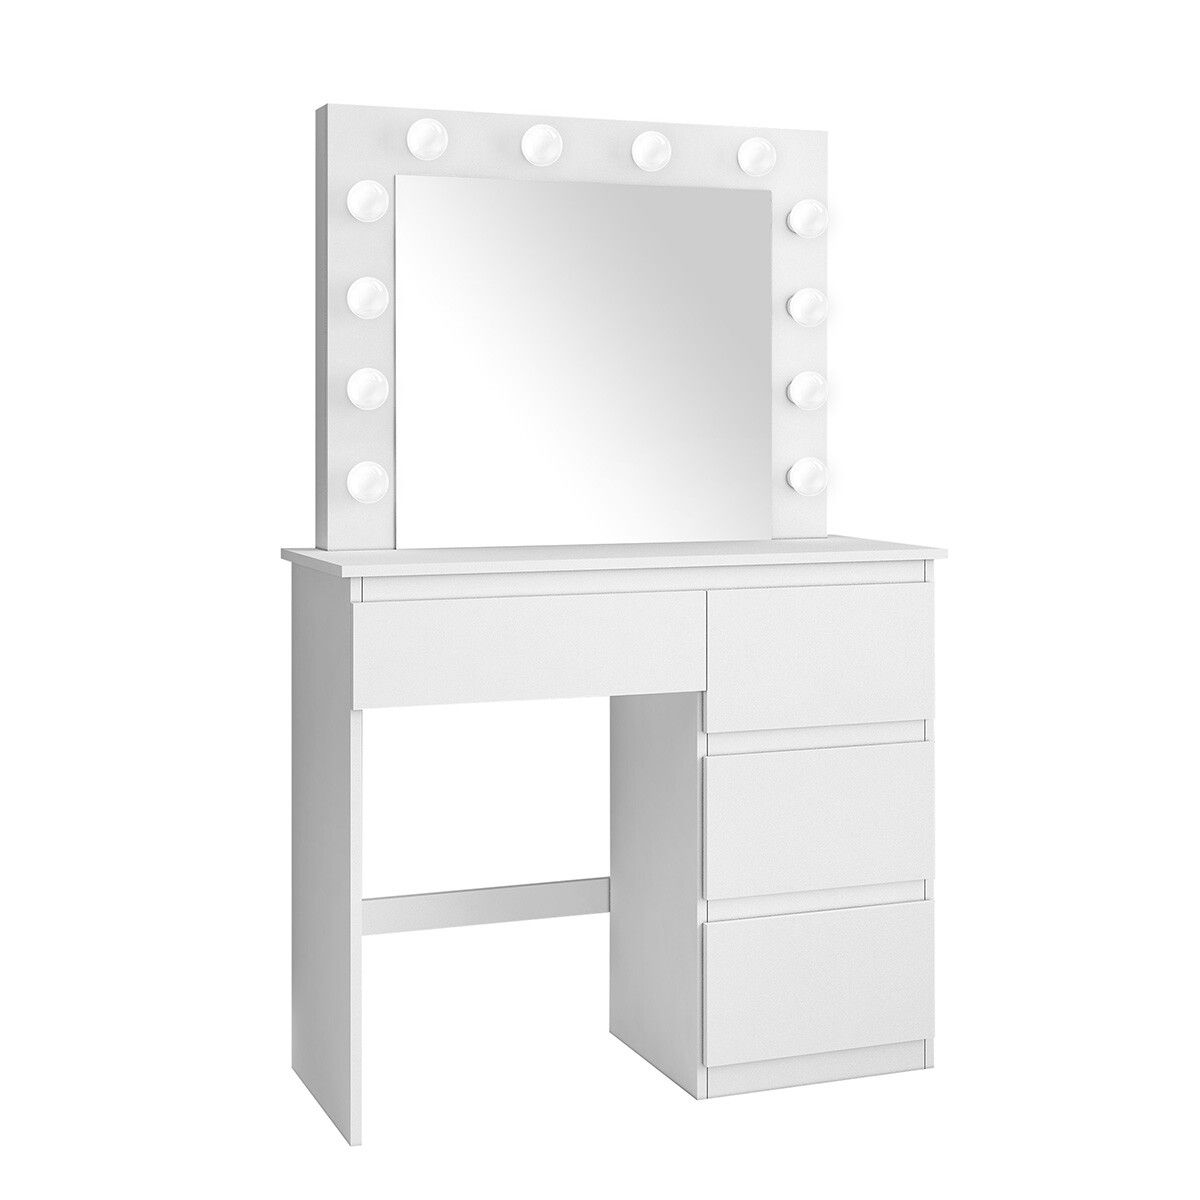 White Dressing Table Dresser Vanity Makeup Table with LED Lighted Mirror and Four Drawers